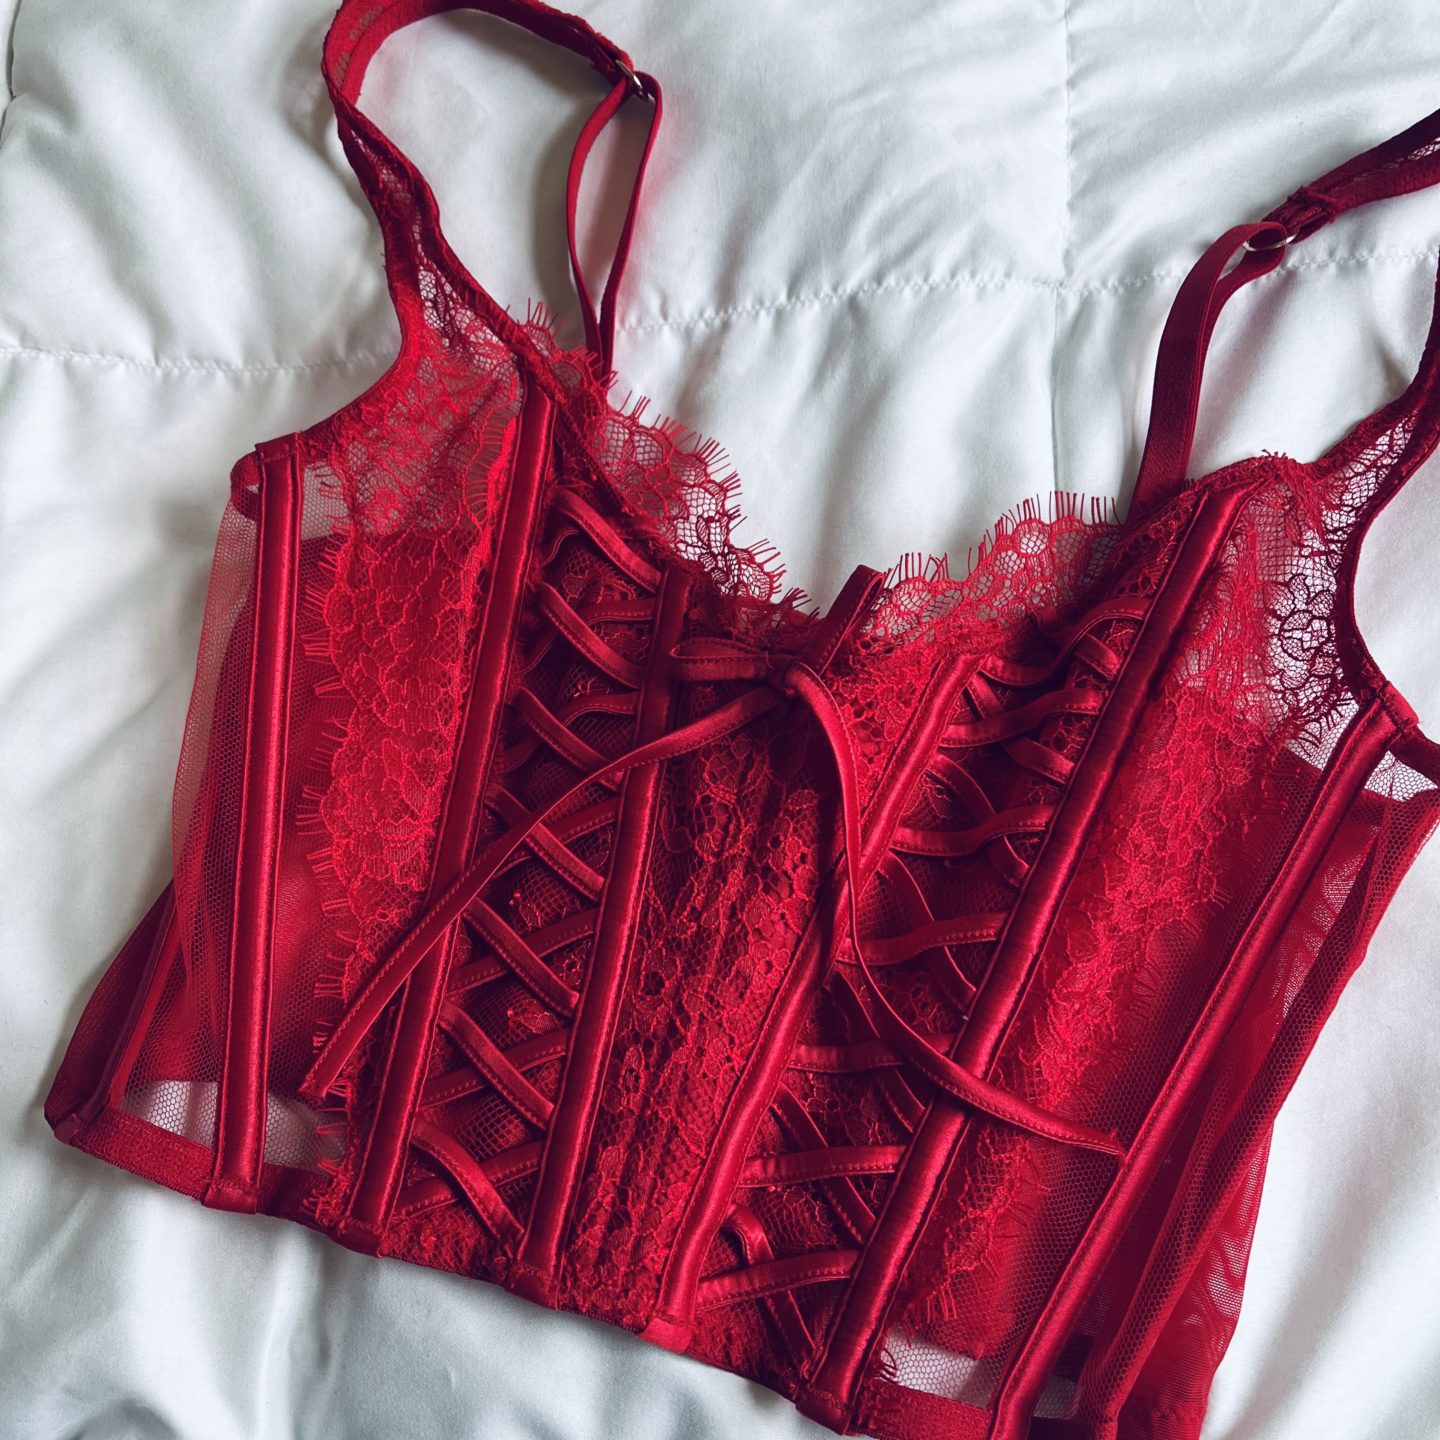 4 empowering reasons to wear lingerie more often